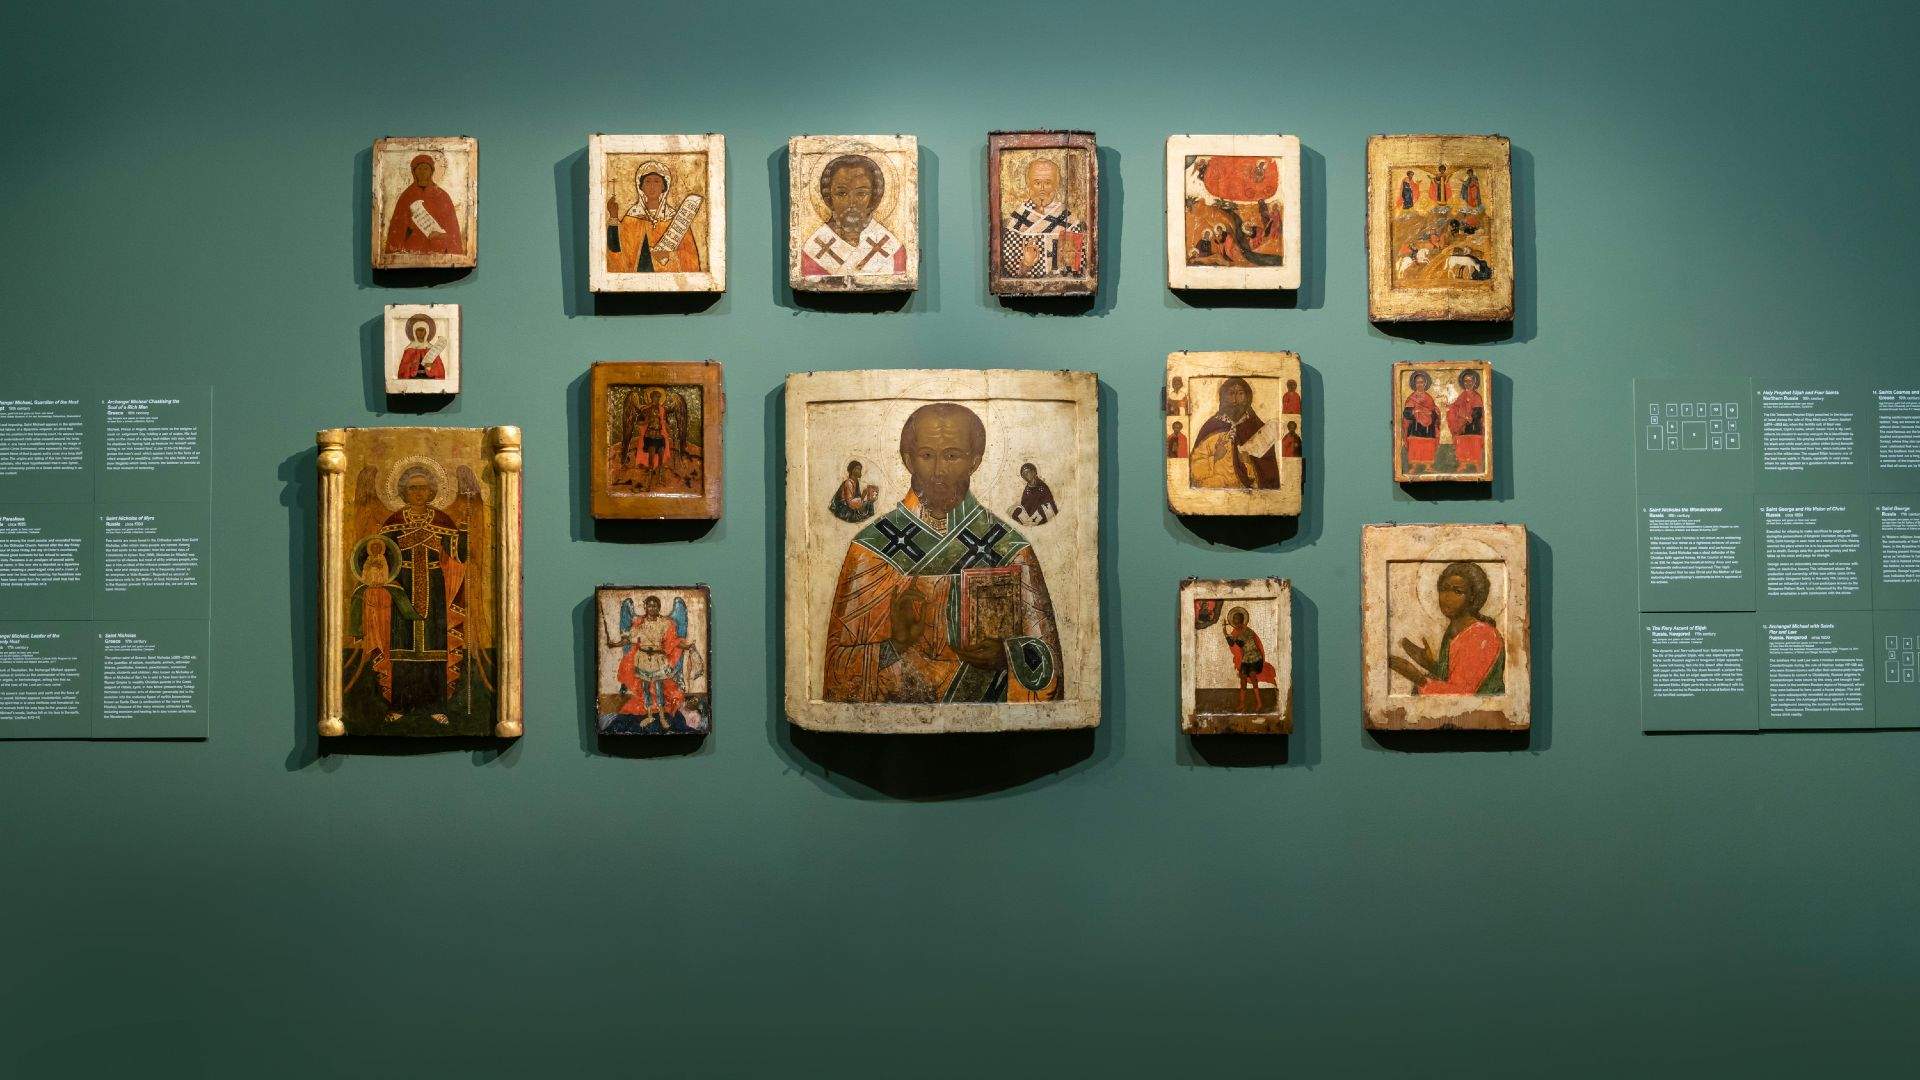 Heavenly Beings: Icons of the Christian Orthodox World